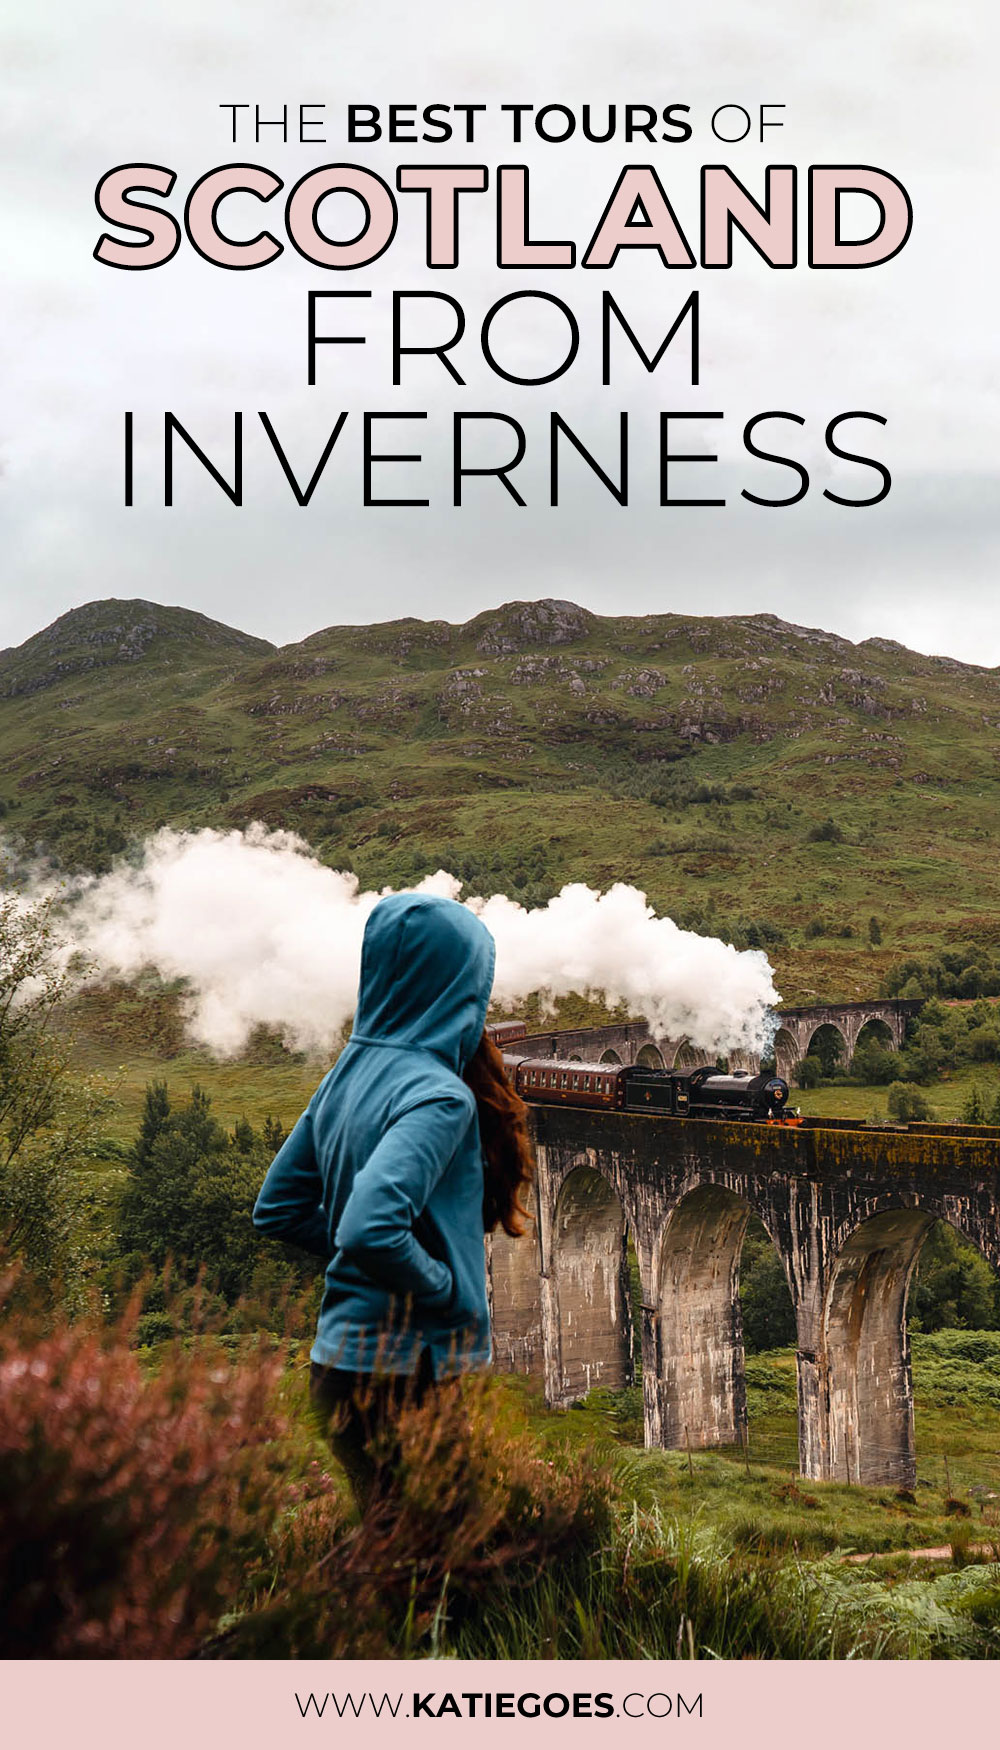 The Best Tours from Inverness of Scotland